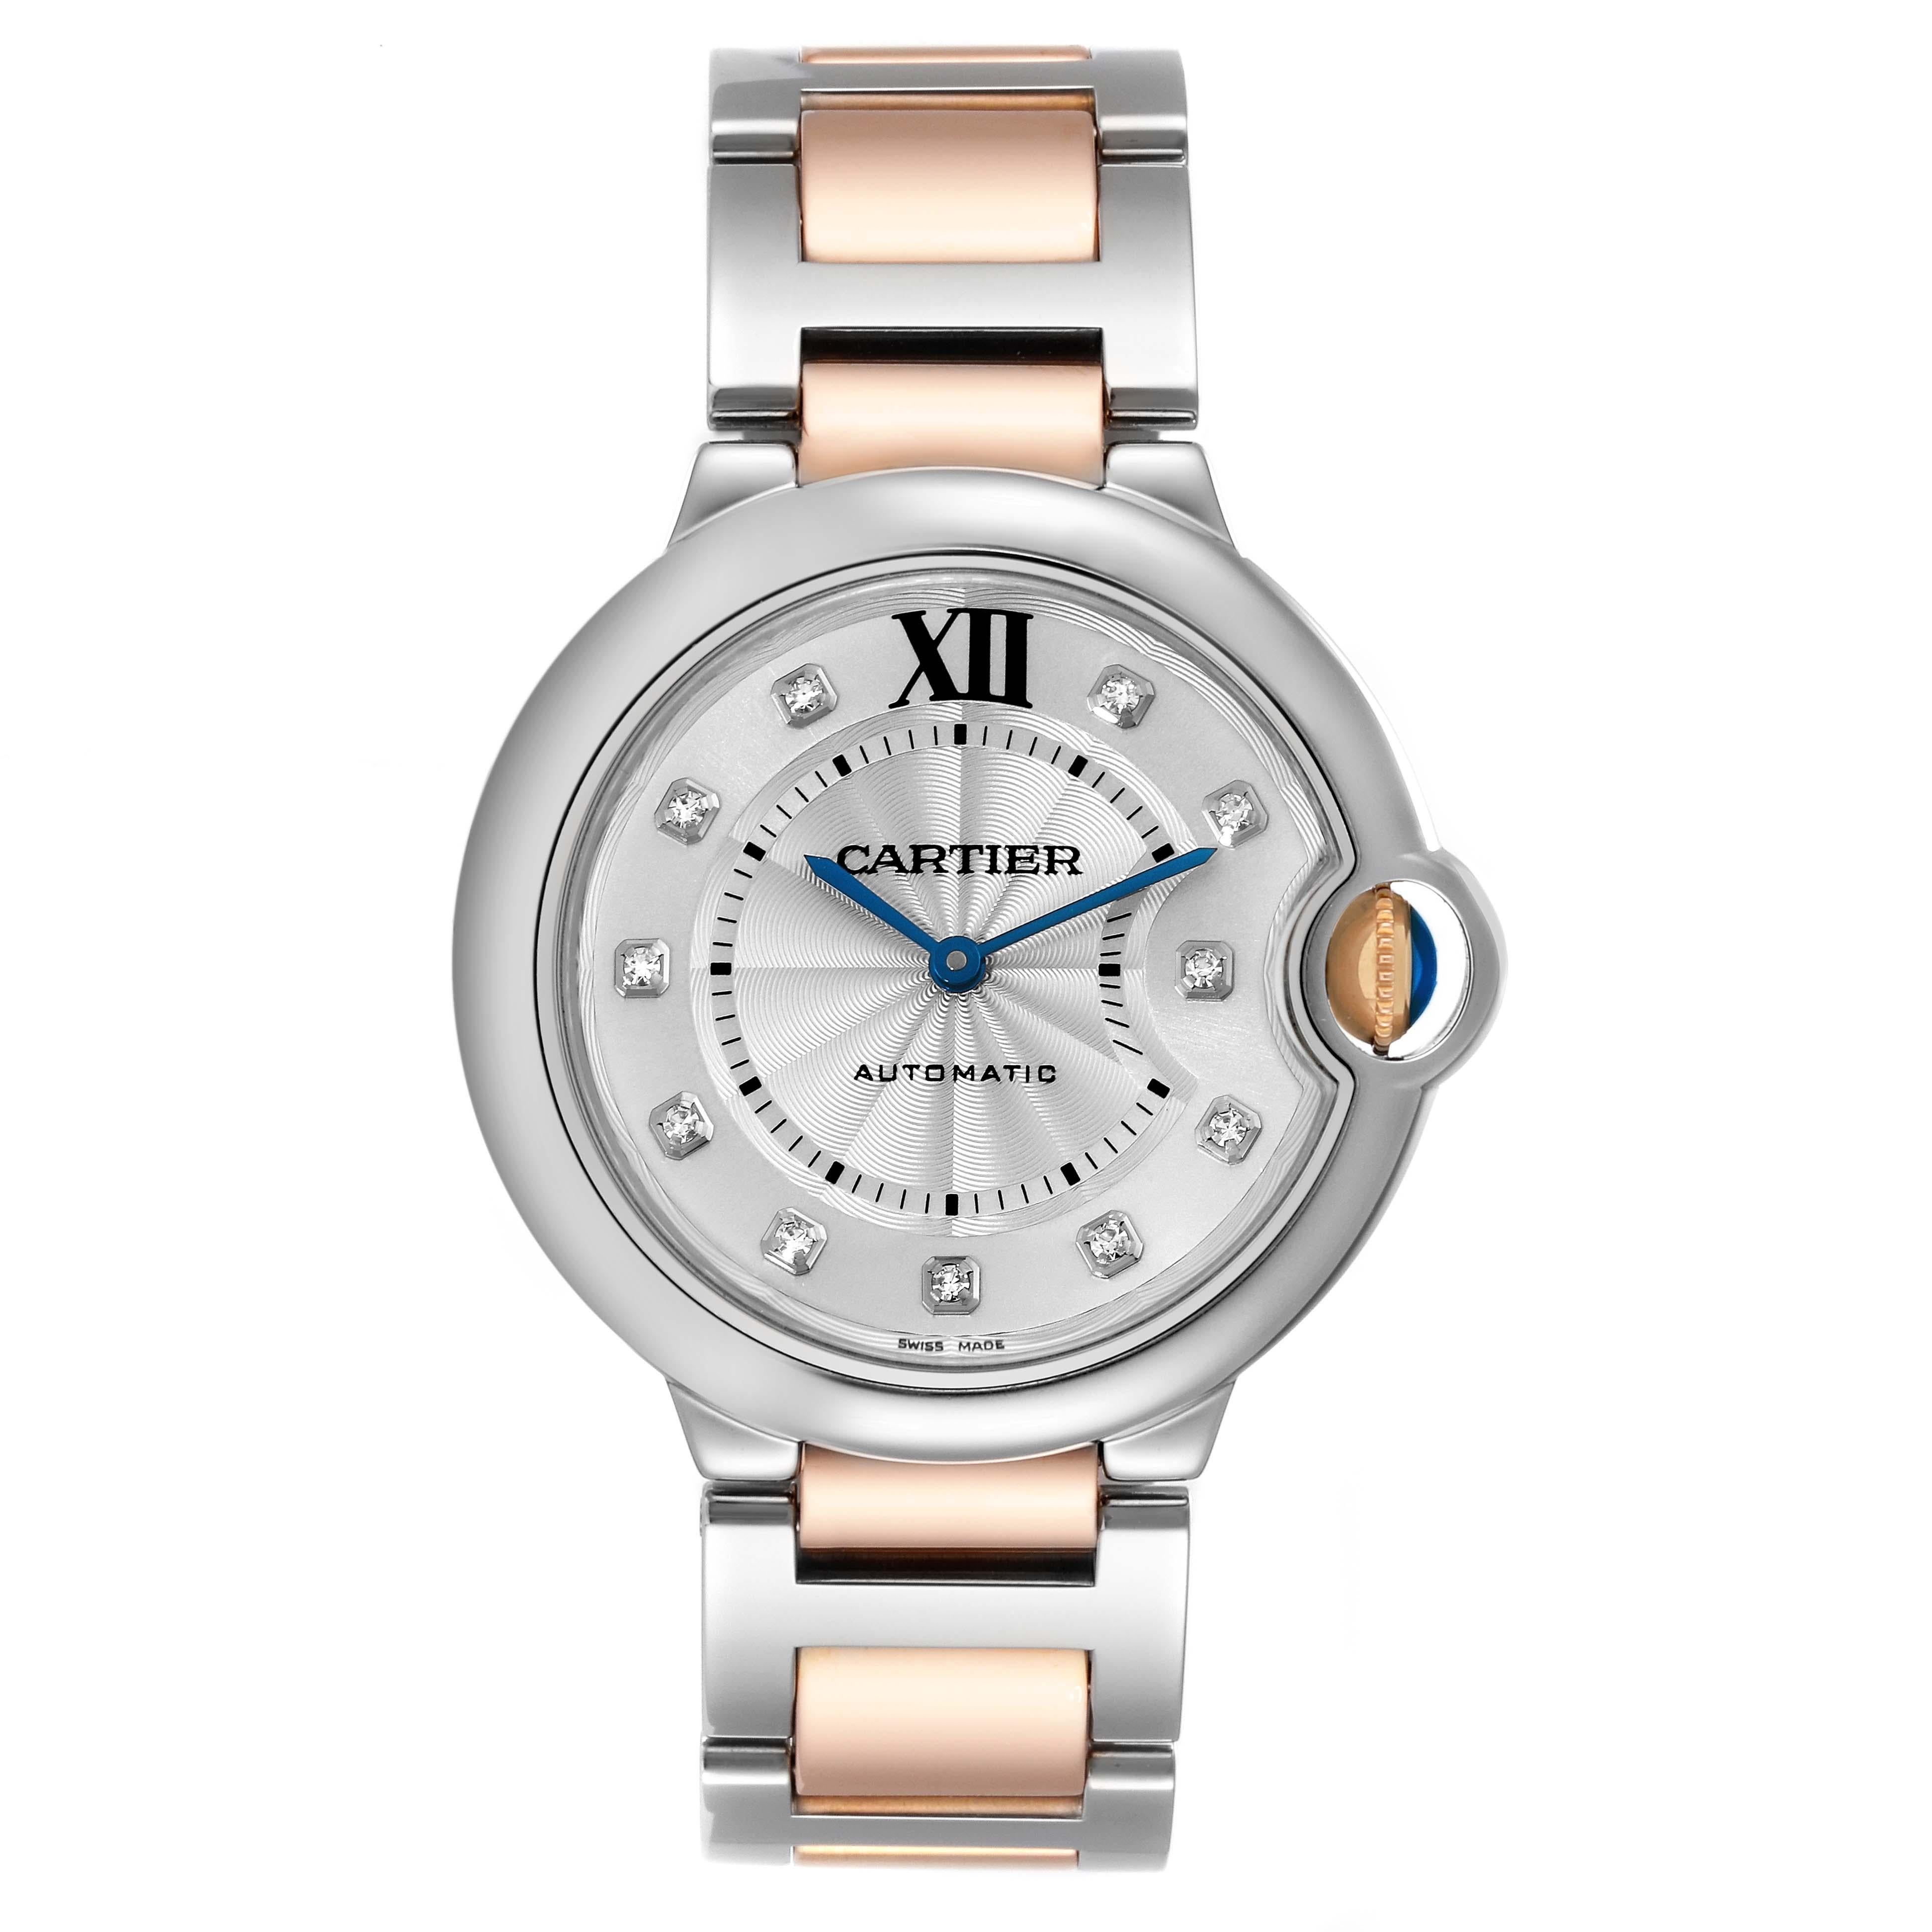 Cartier Ballon Bleu Midsize 36 Steel Rose Gold Diamond Ladies Watch W3BB0018. Automatic self-winding movement. Stainless steel case 36 mm in diameter. 18k rose gold fluted crown set with a blue spinel cabochon. Stainless steel smooth bezel. Scratch